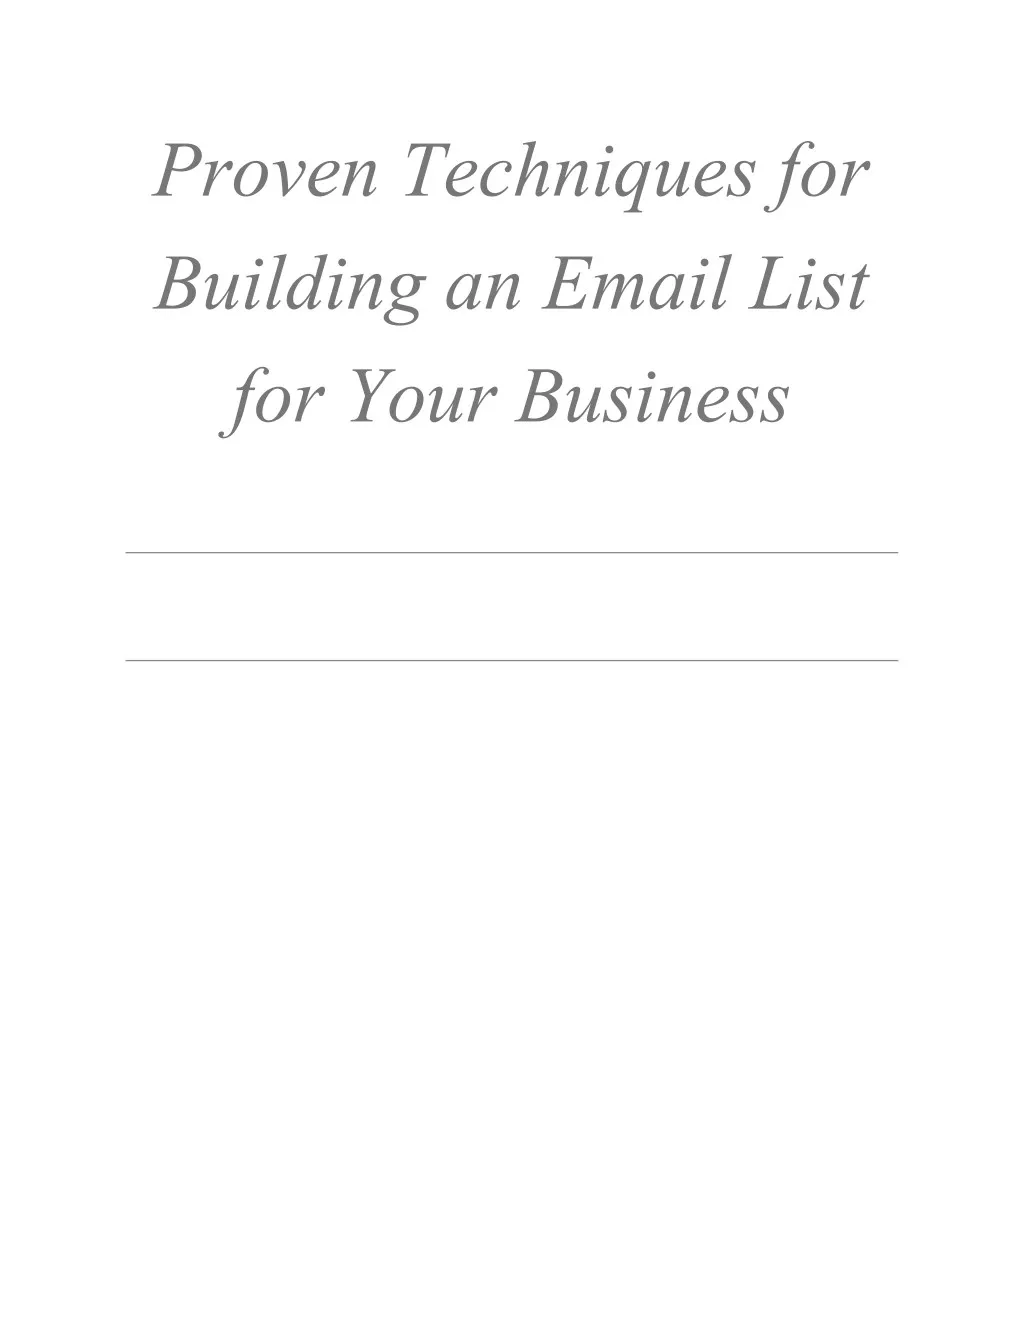 proven techniques for building an email list